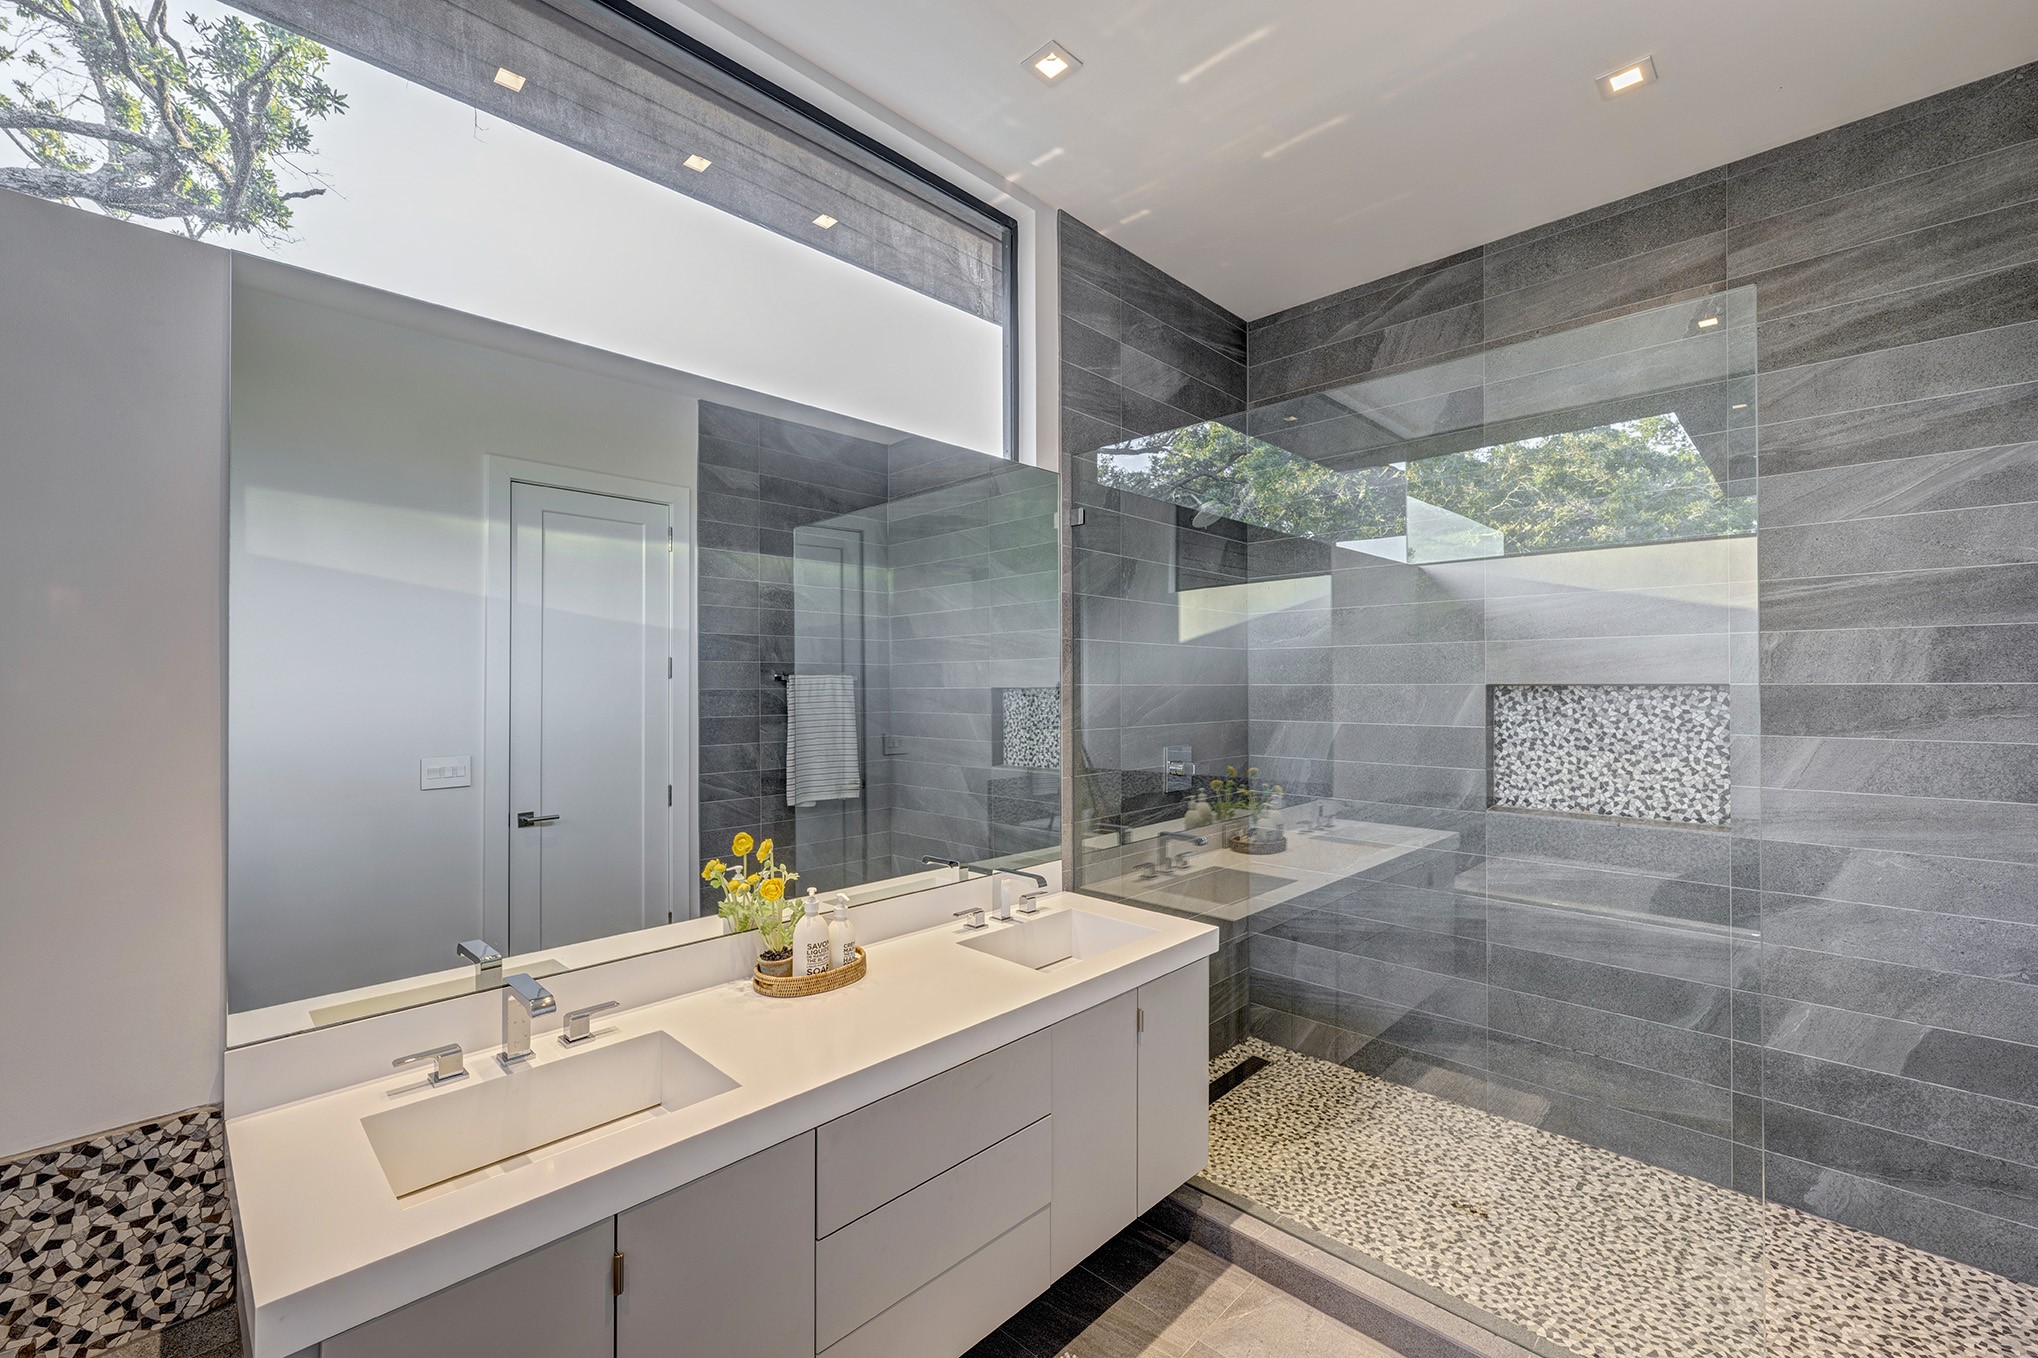 Walk-in shower for the hallway bathroom. The water closet is outside this room for added privacy. Owners saw this design in Australia and incorporated into the home.